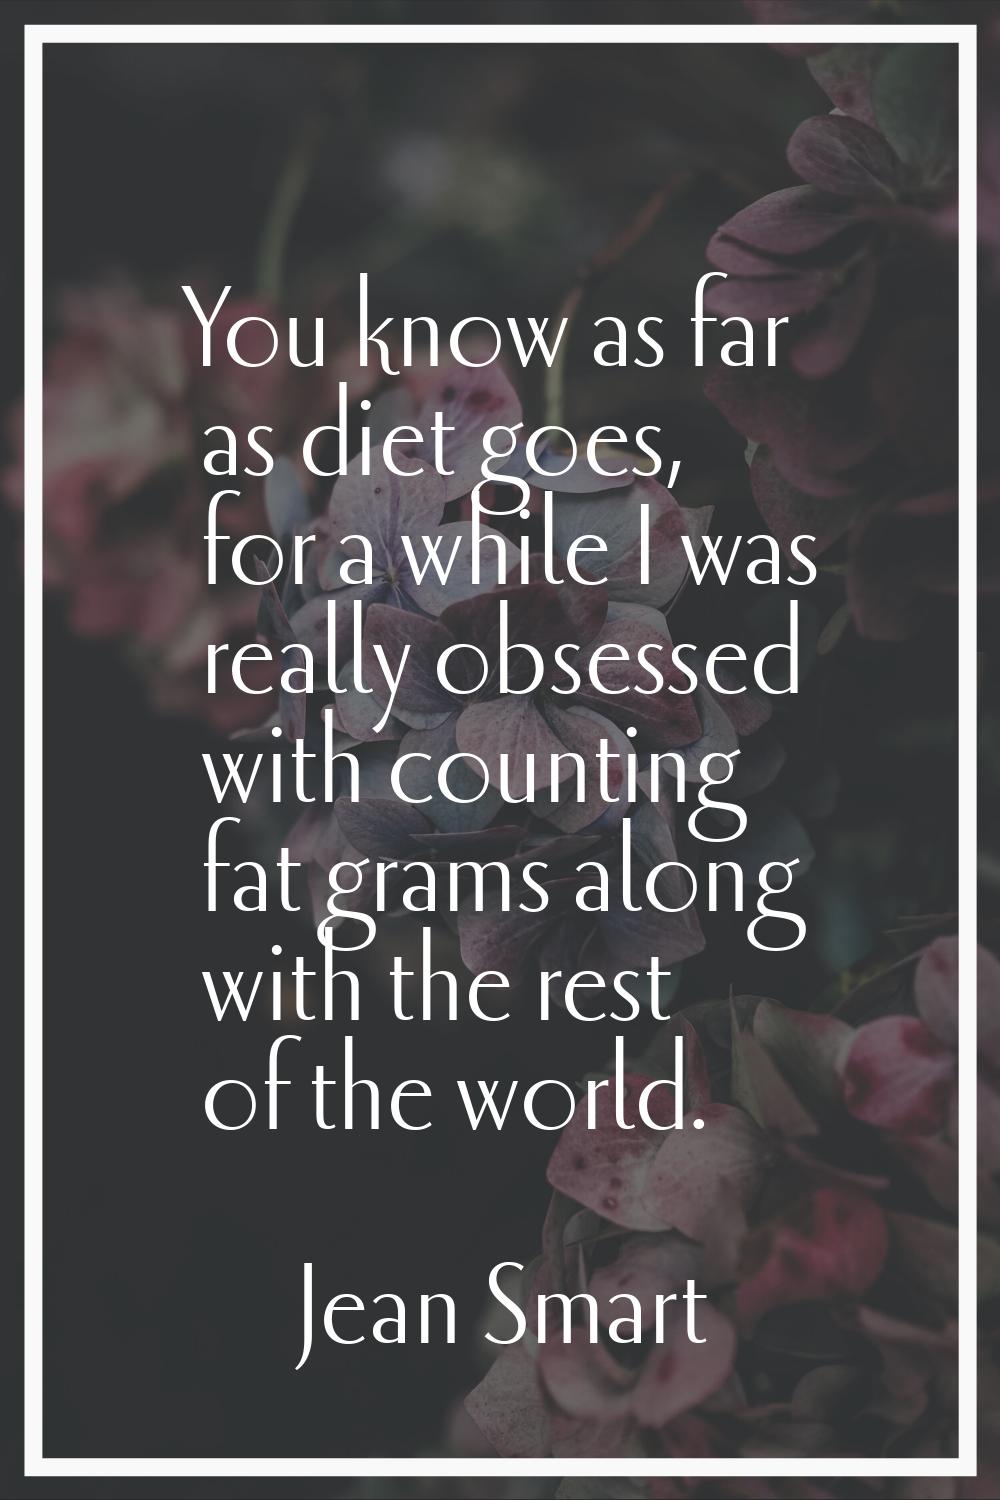 You know as far as diet goes, for a while I was really obsessed with counting fat grams along with 